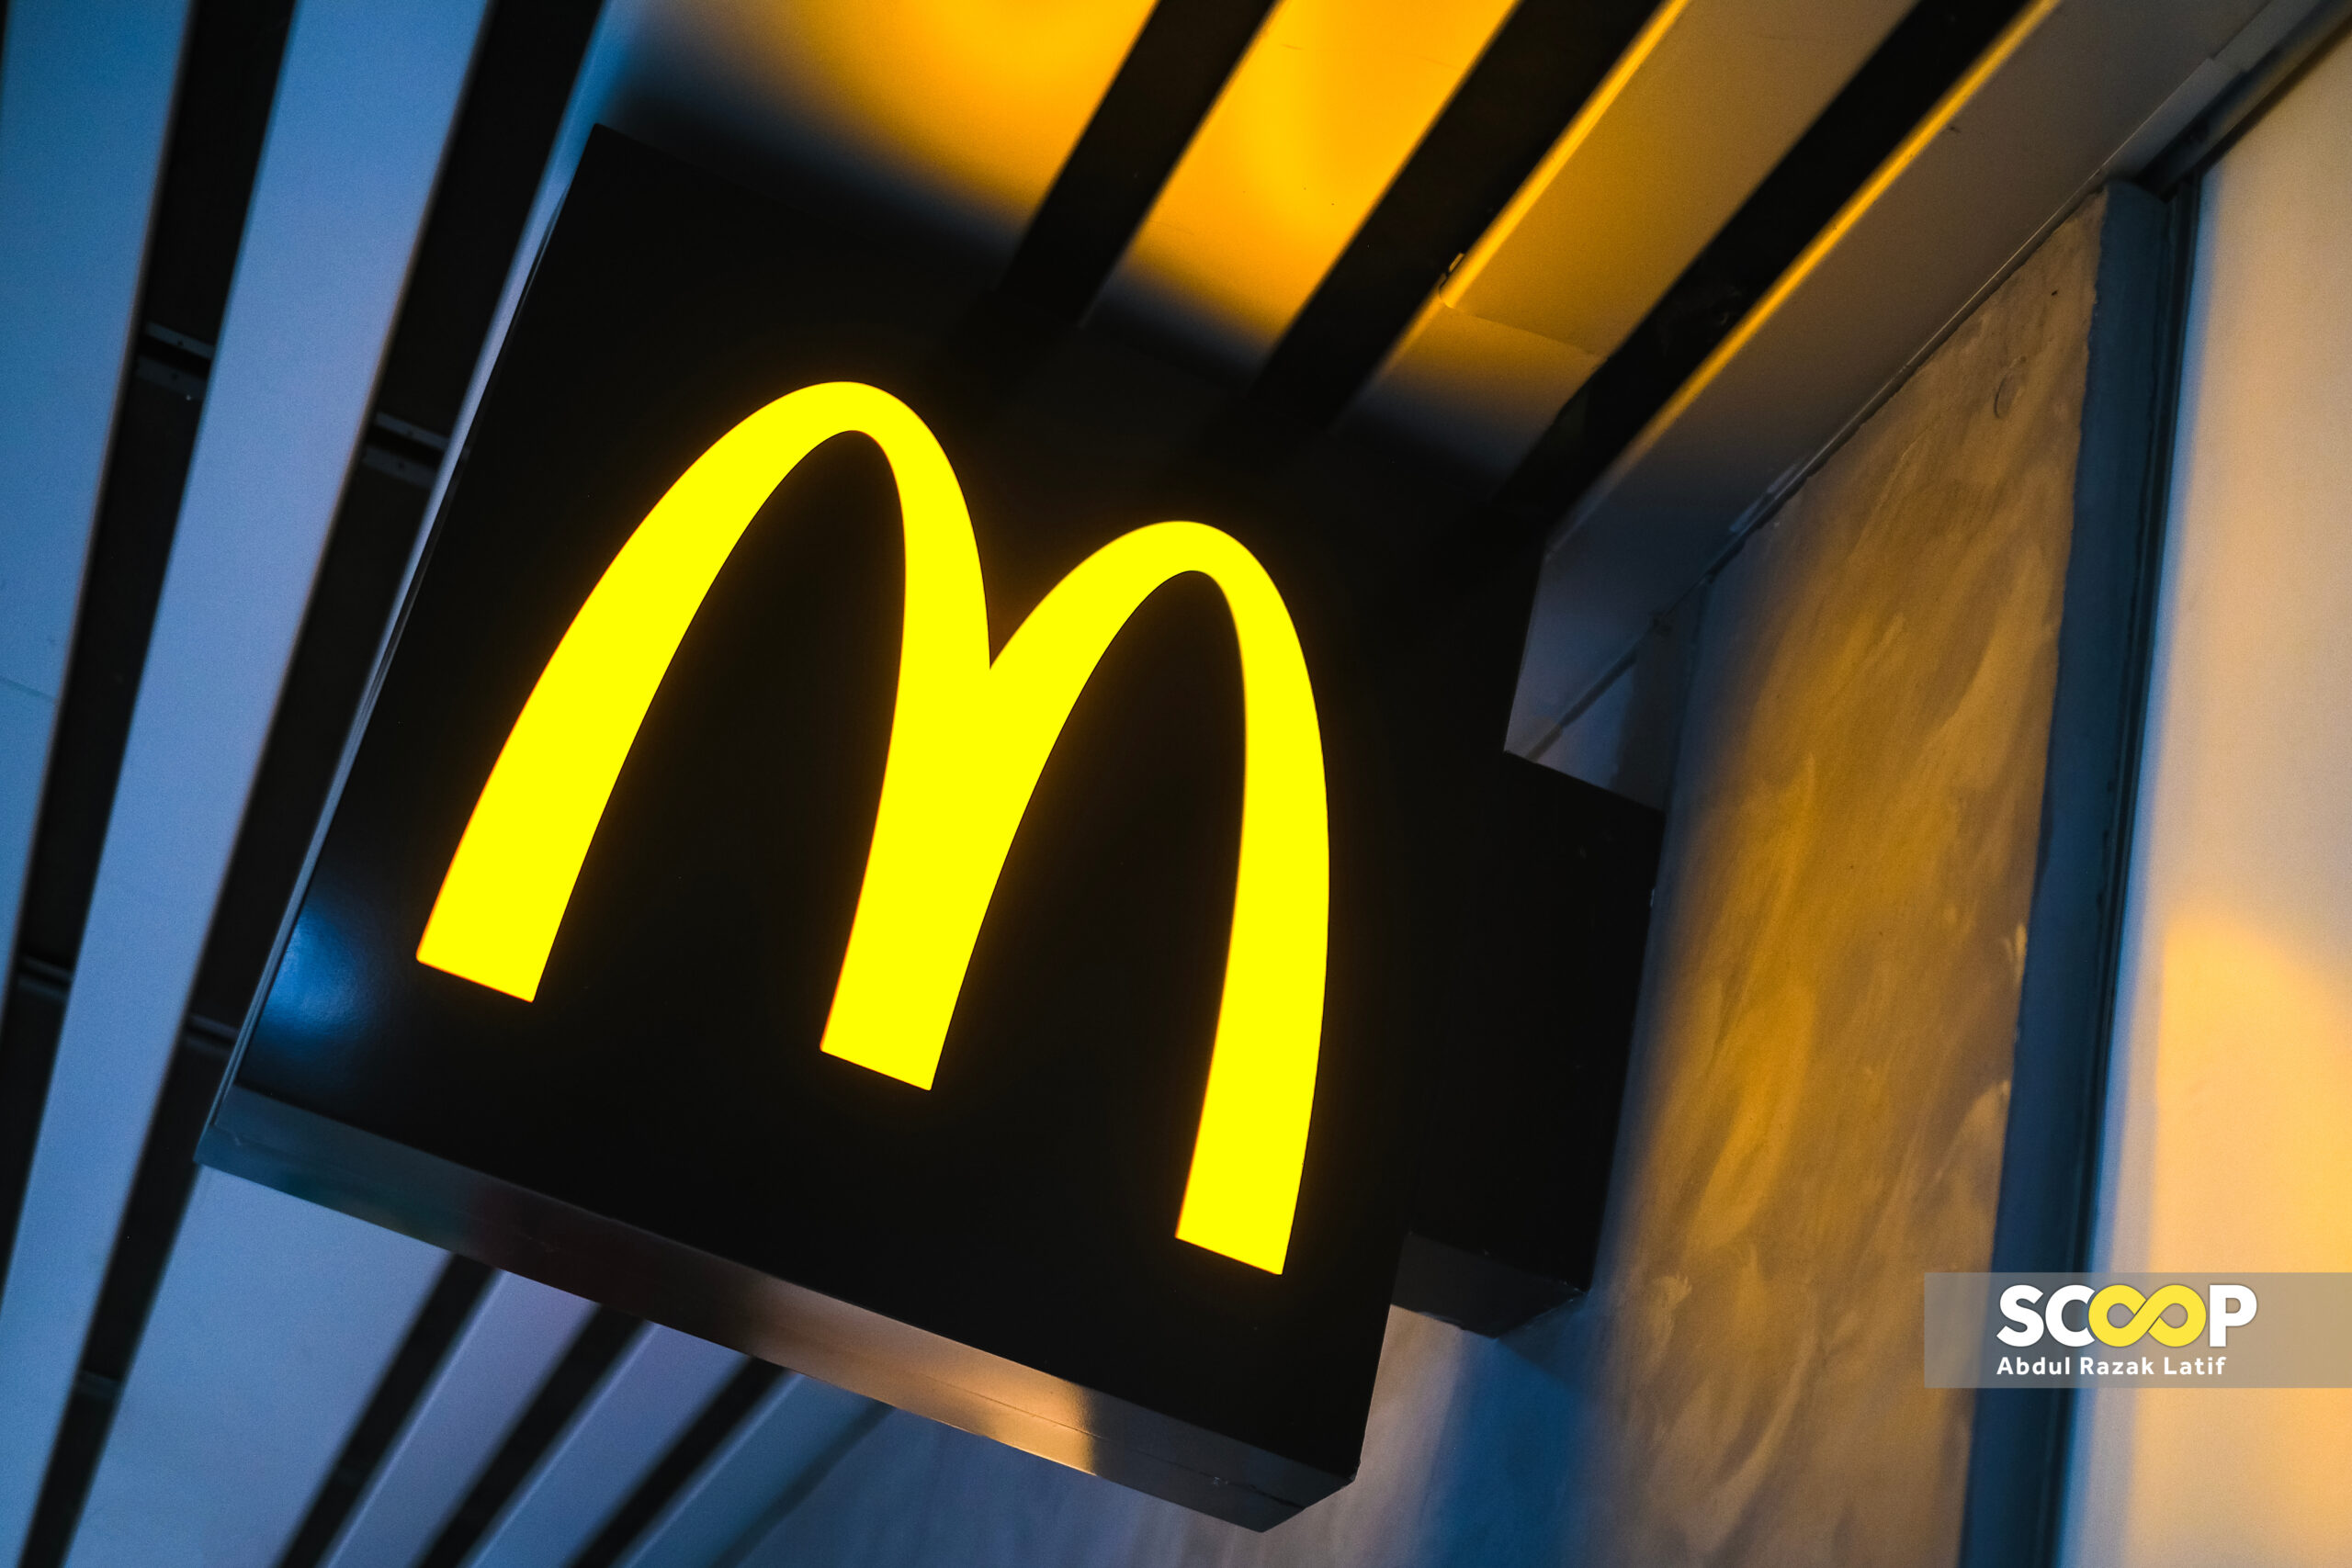 EU court strips McDonald’s of trademark to ‘Big Mac’ name for poultry products